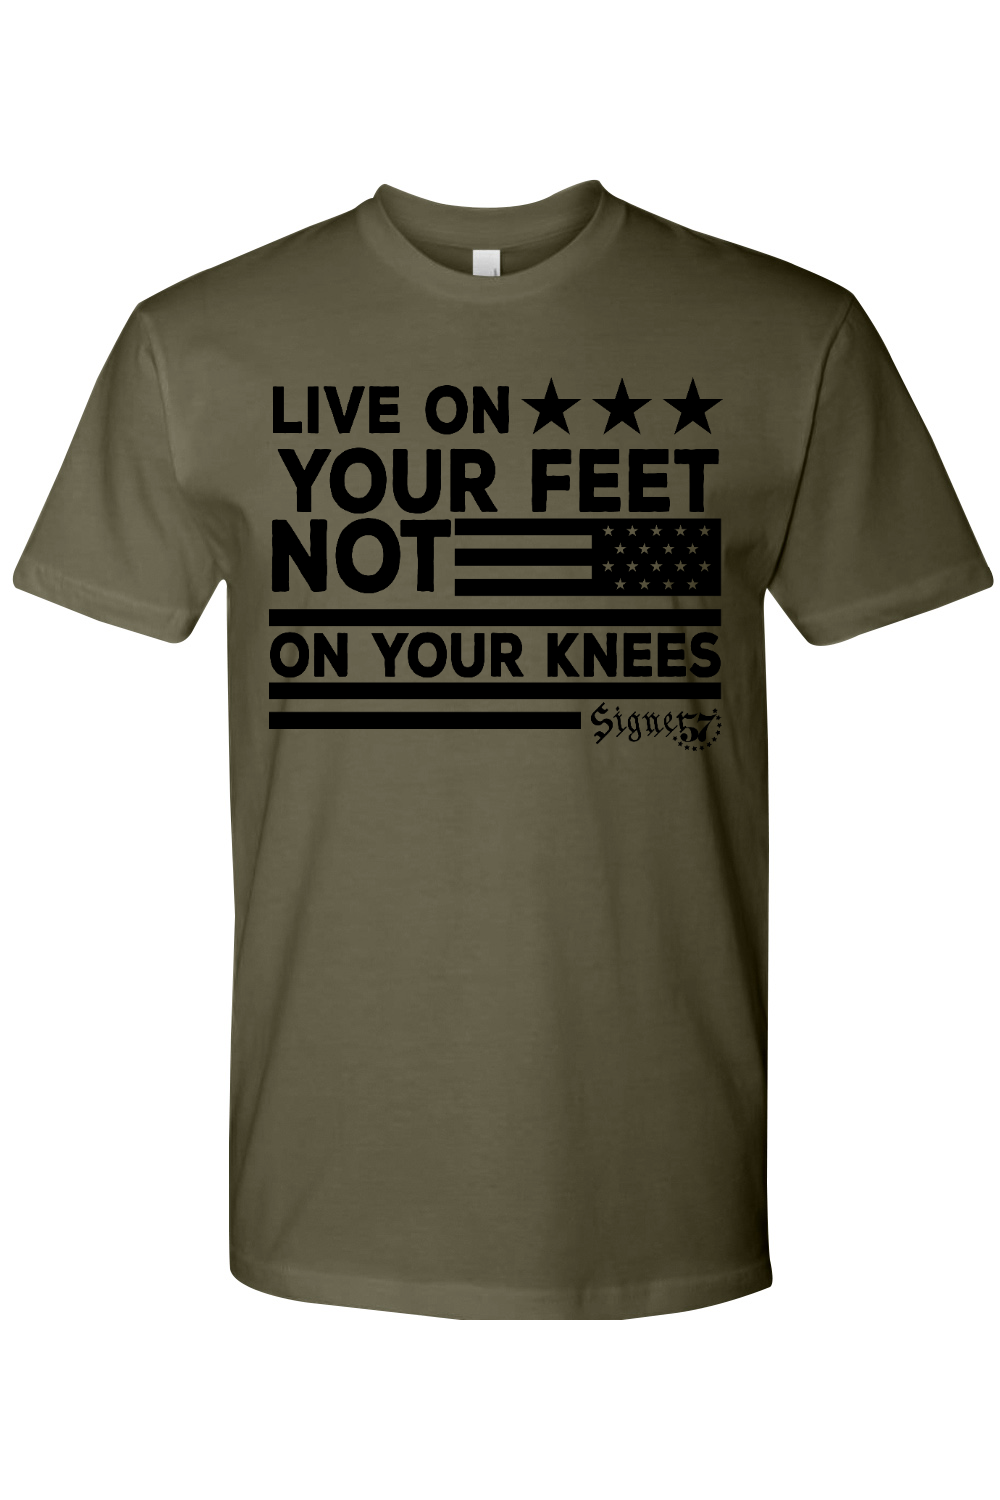 UNISEX T-Shirt - Live On Your Feet Not On Your Knees